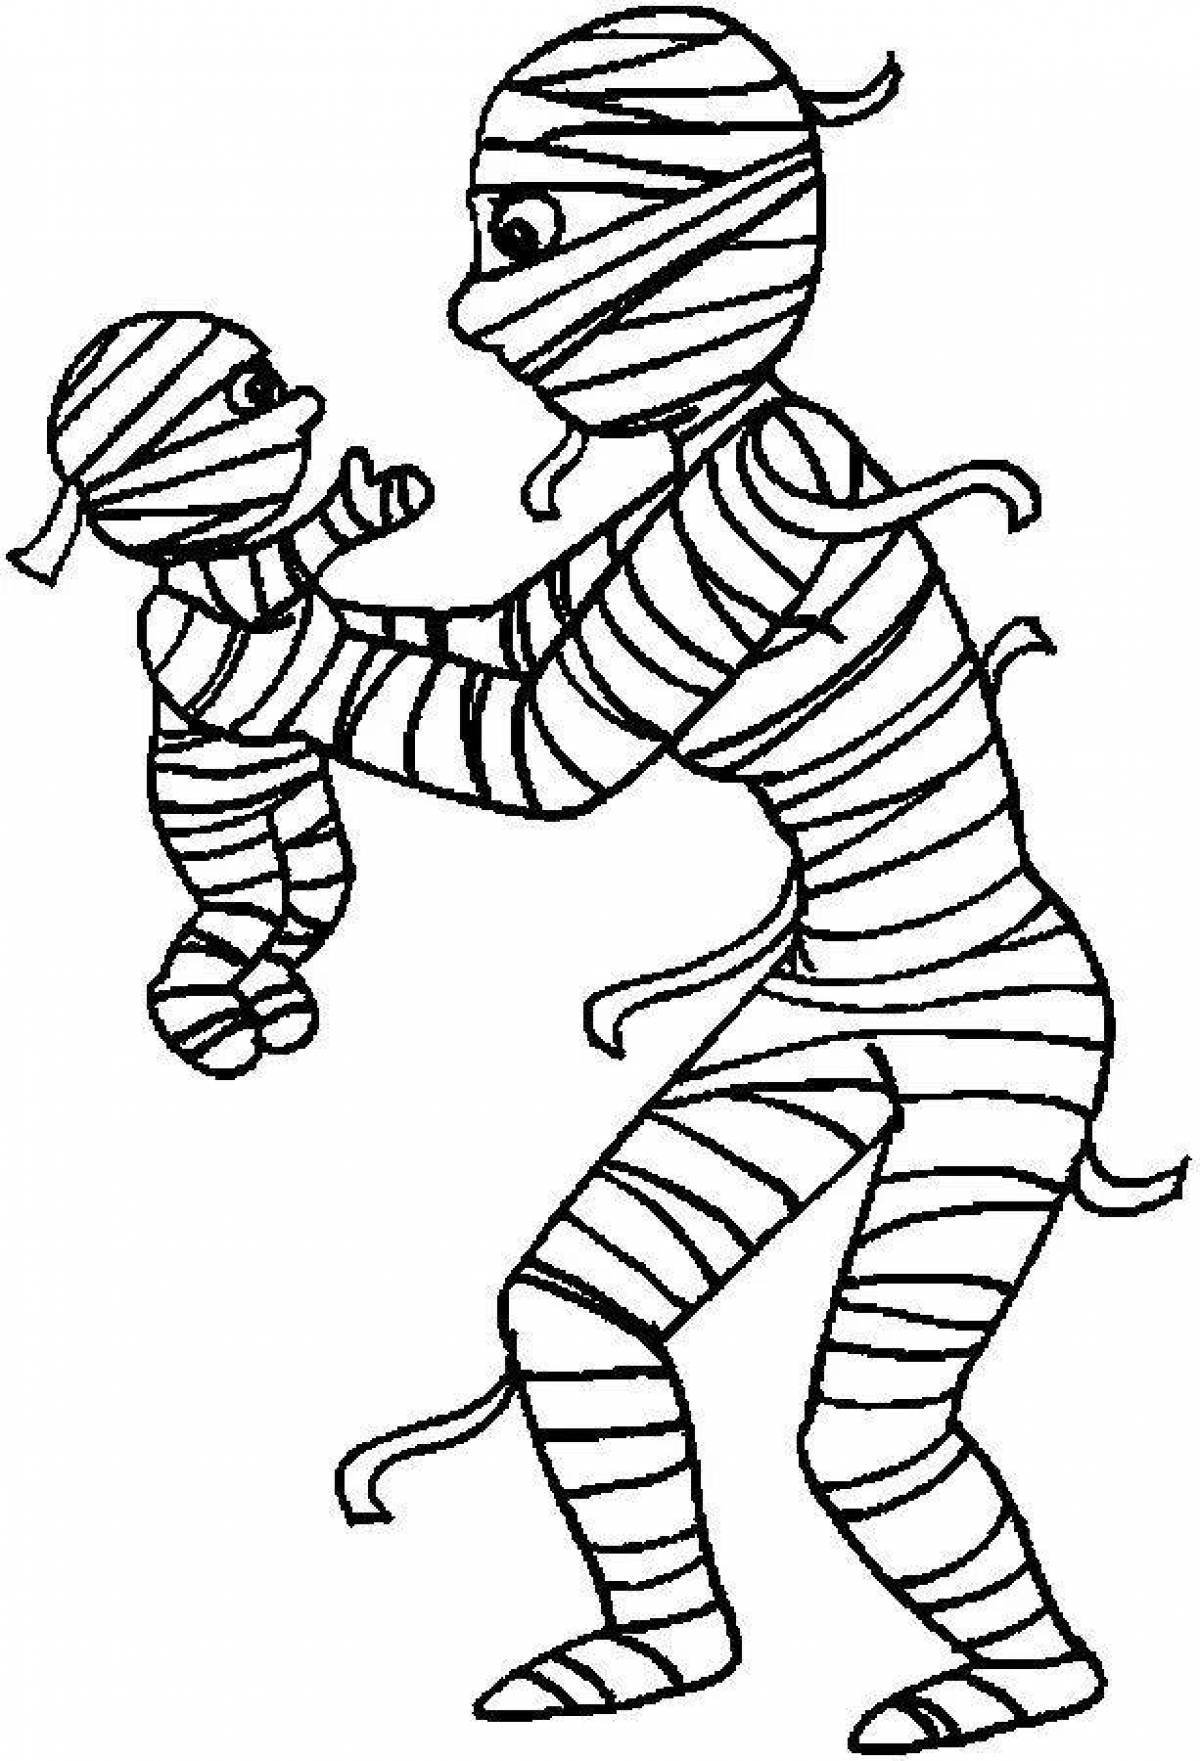 Ghasta mummy coloring page